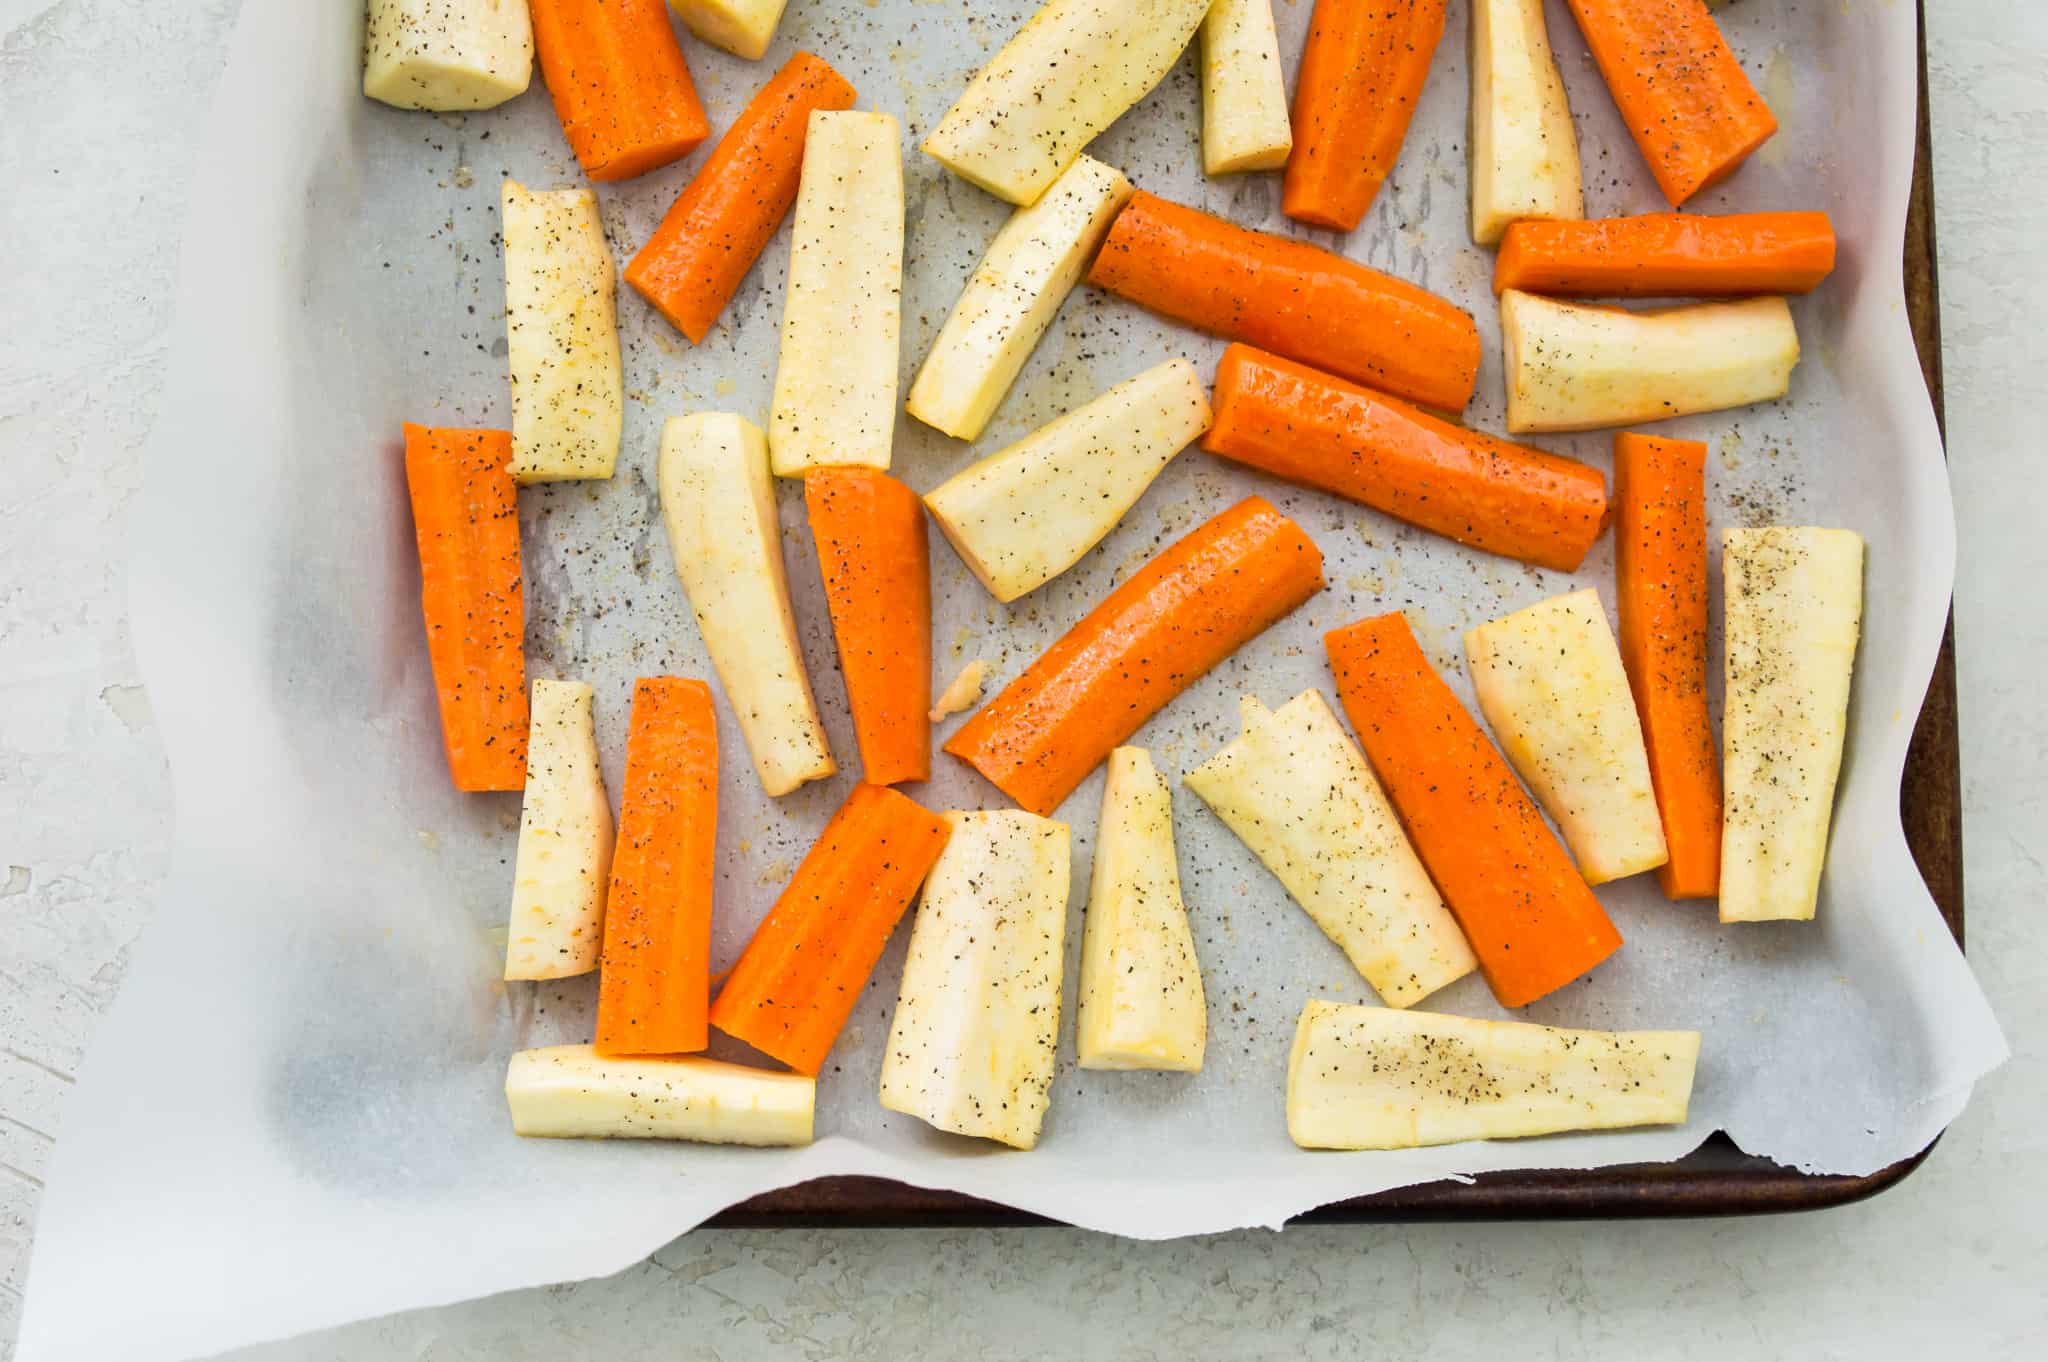 Chopped carrots and parsnips on a baking sheet.